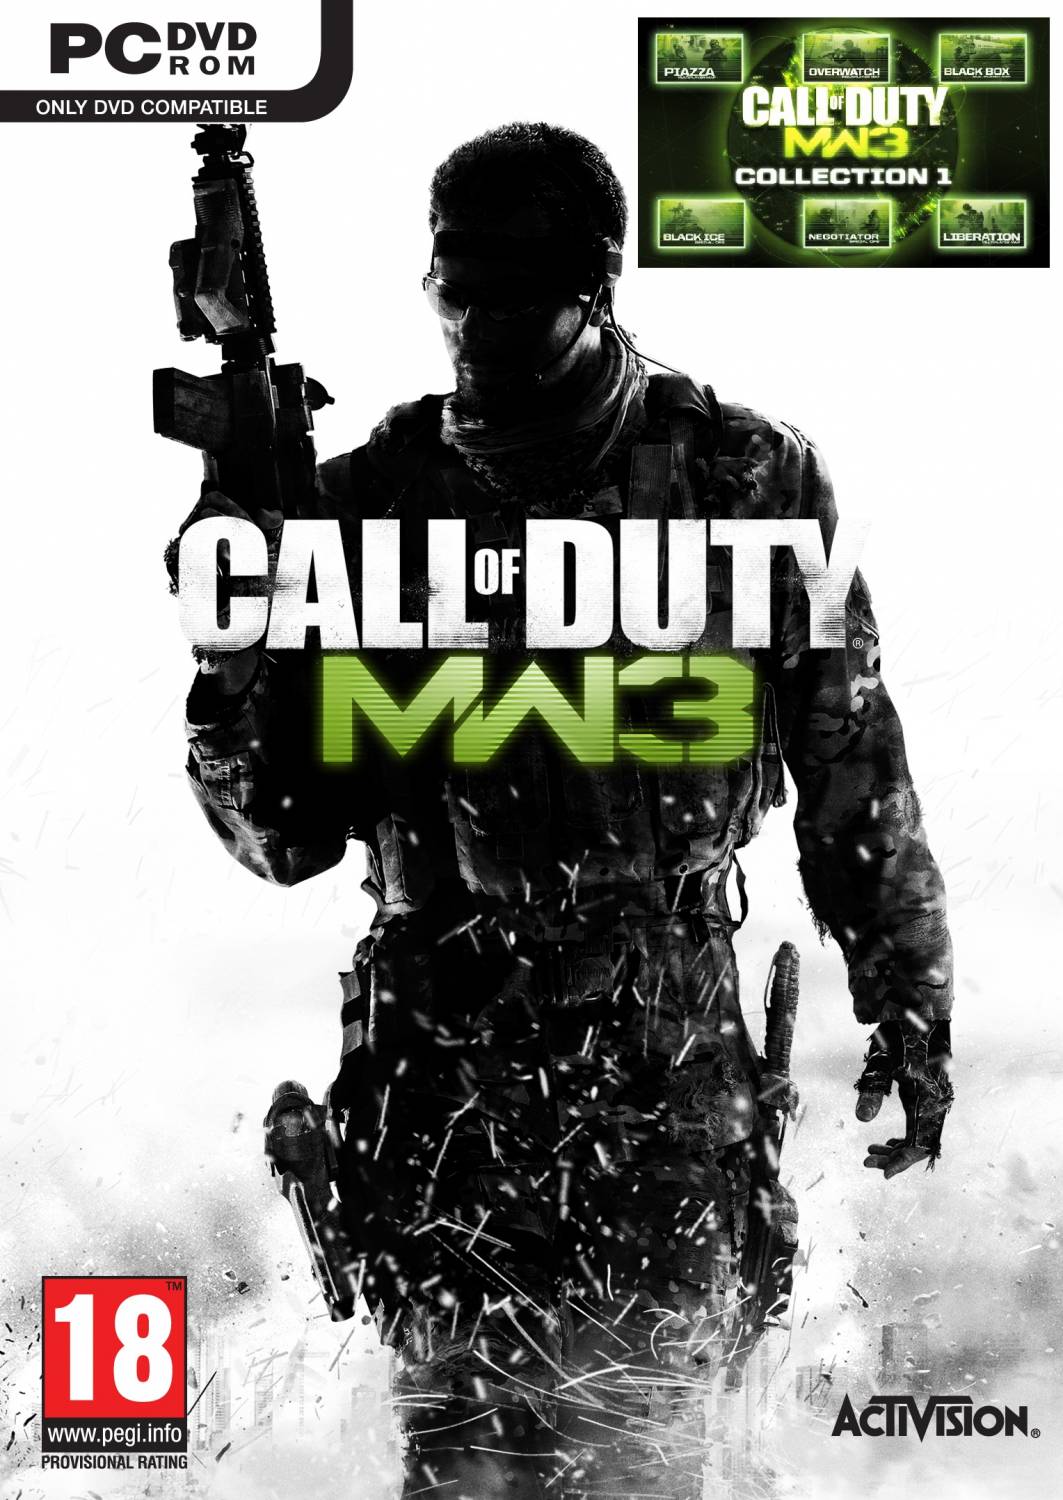 Call of Duty: MW 3 DLC Collection 1